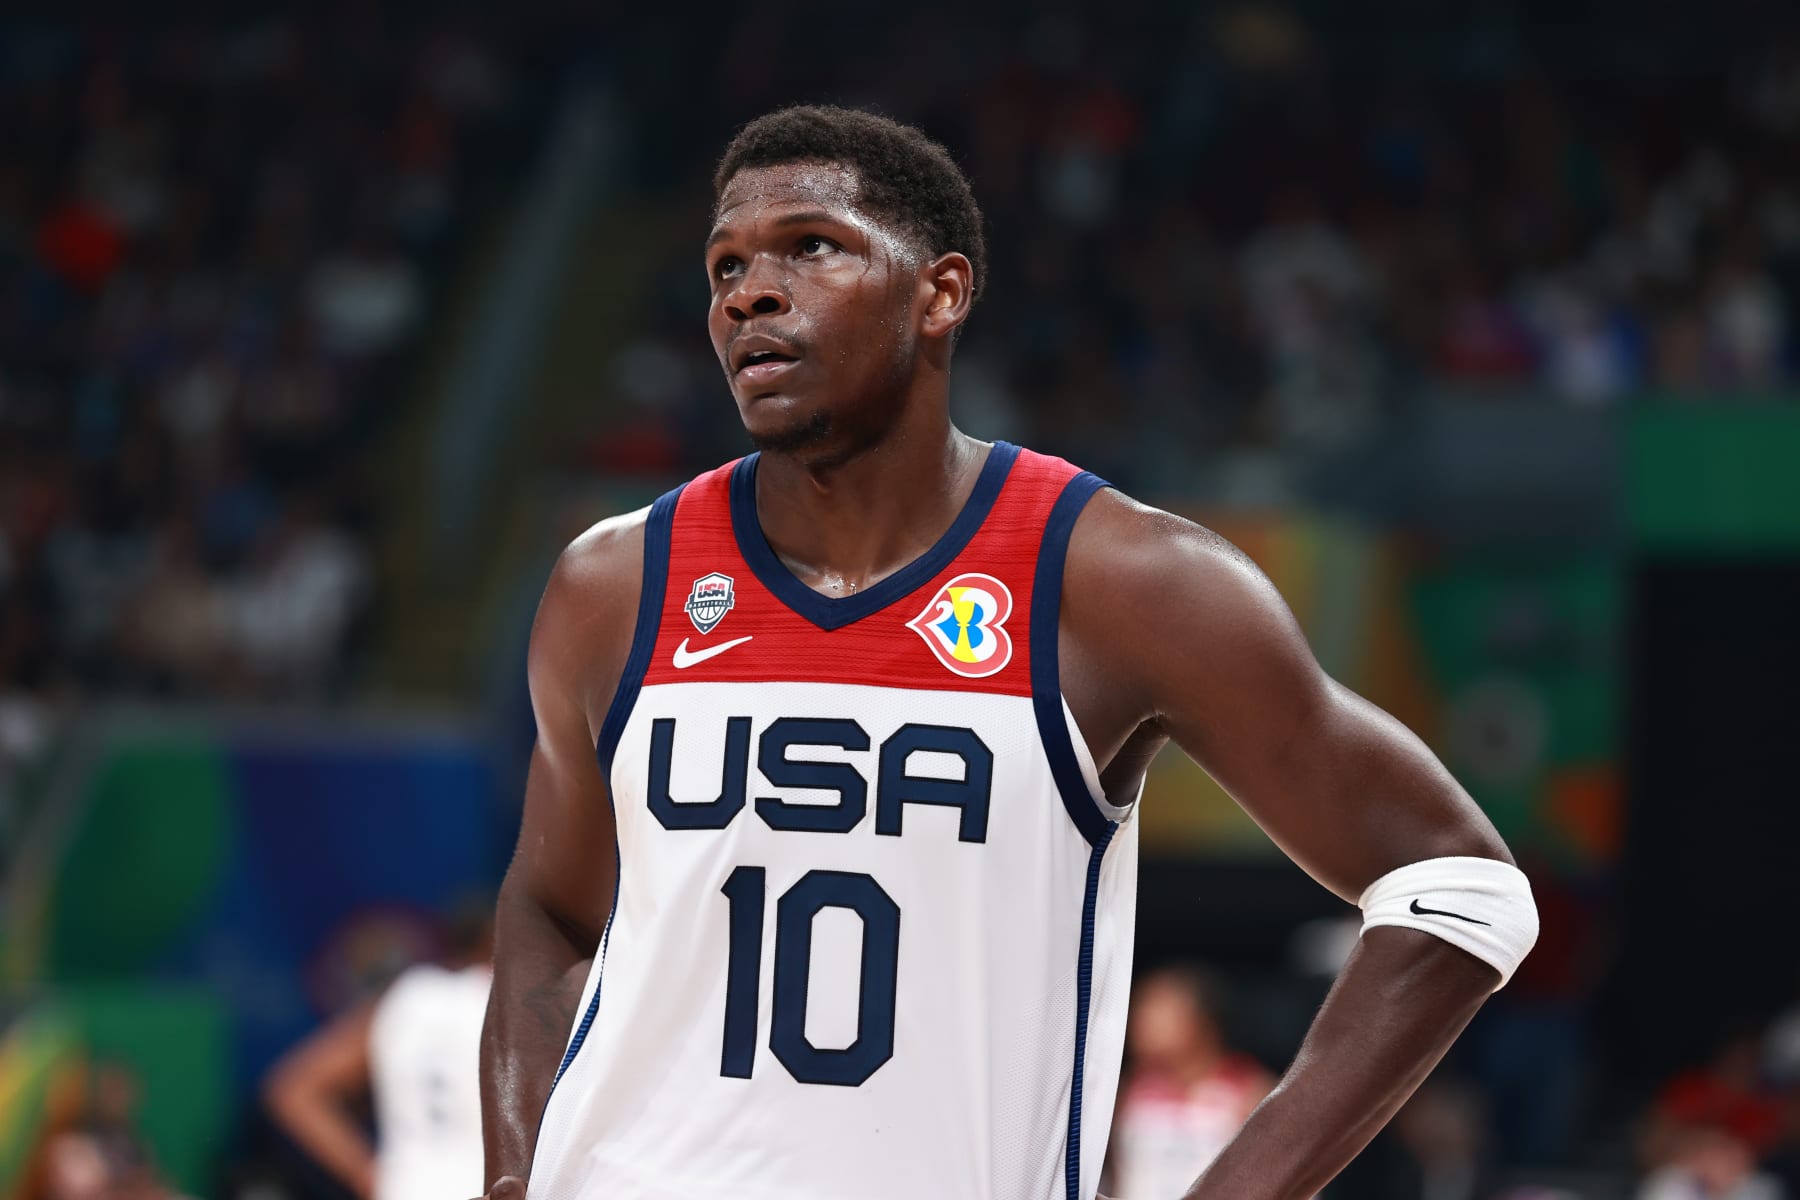 Tokyo Olympics: USA Basketball jerseys, shirts and caps are selling fast 